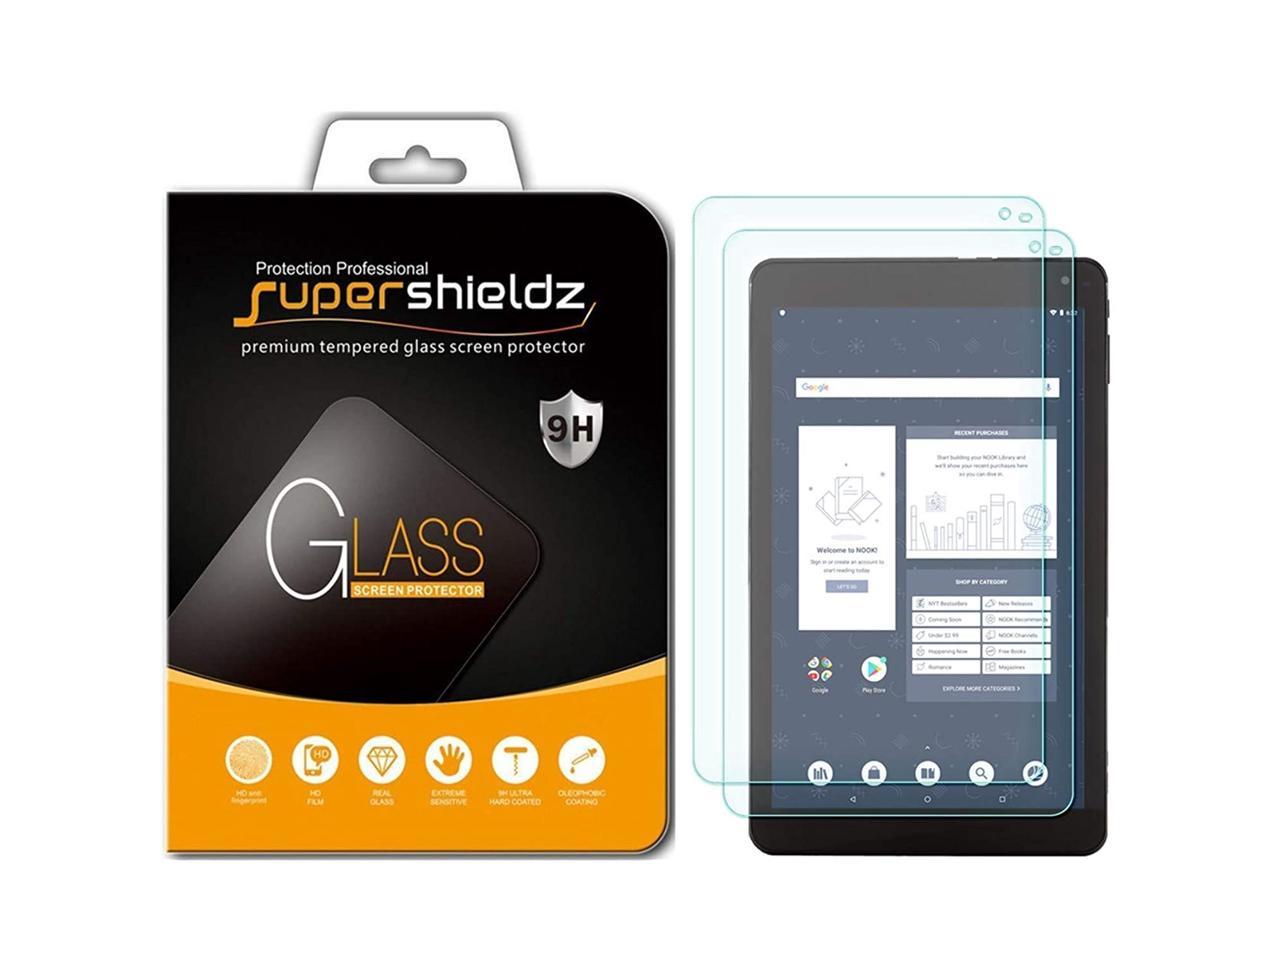 BNTV650 Supershieldz Tempered Glass Screen Protector for Nook Tablet 10.1" 